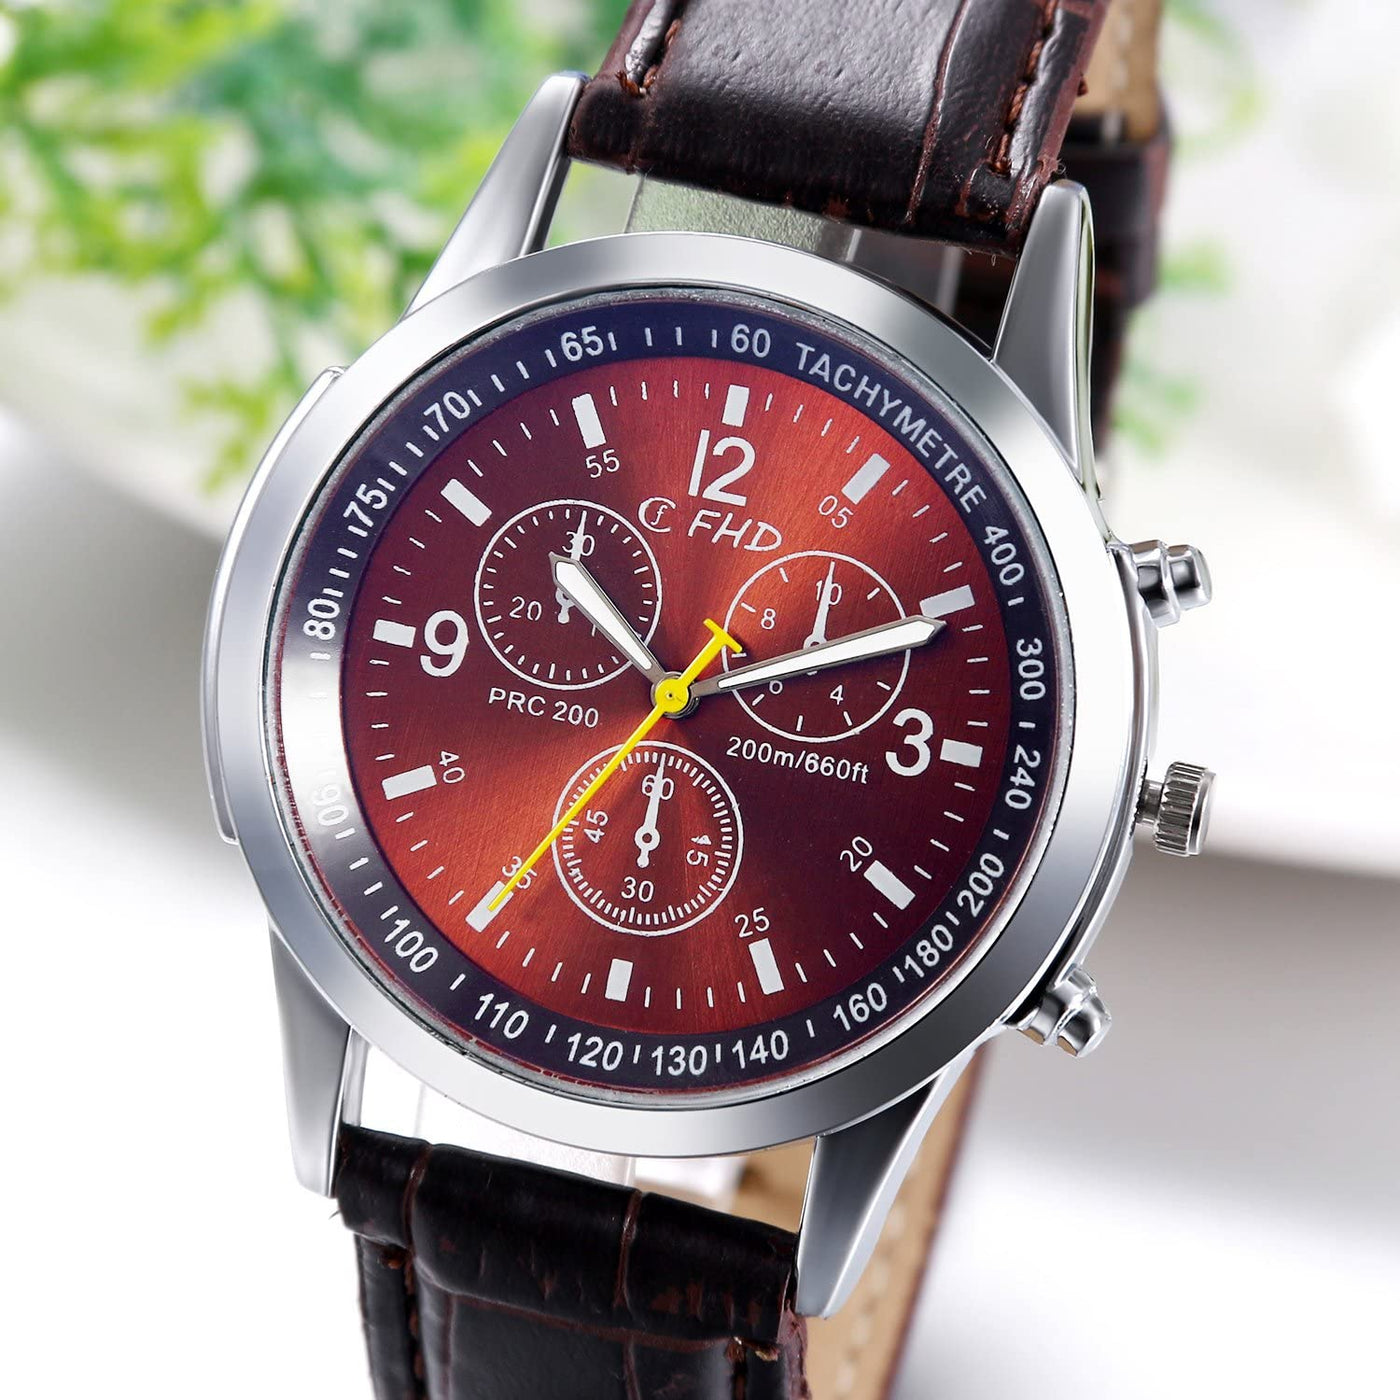 JewelryWe Business Casual Men's Quartz Wrist Watch Dial Leather Strap Watches, for Valentine’s Day